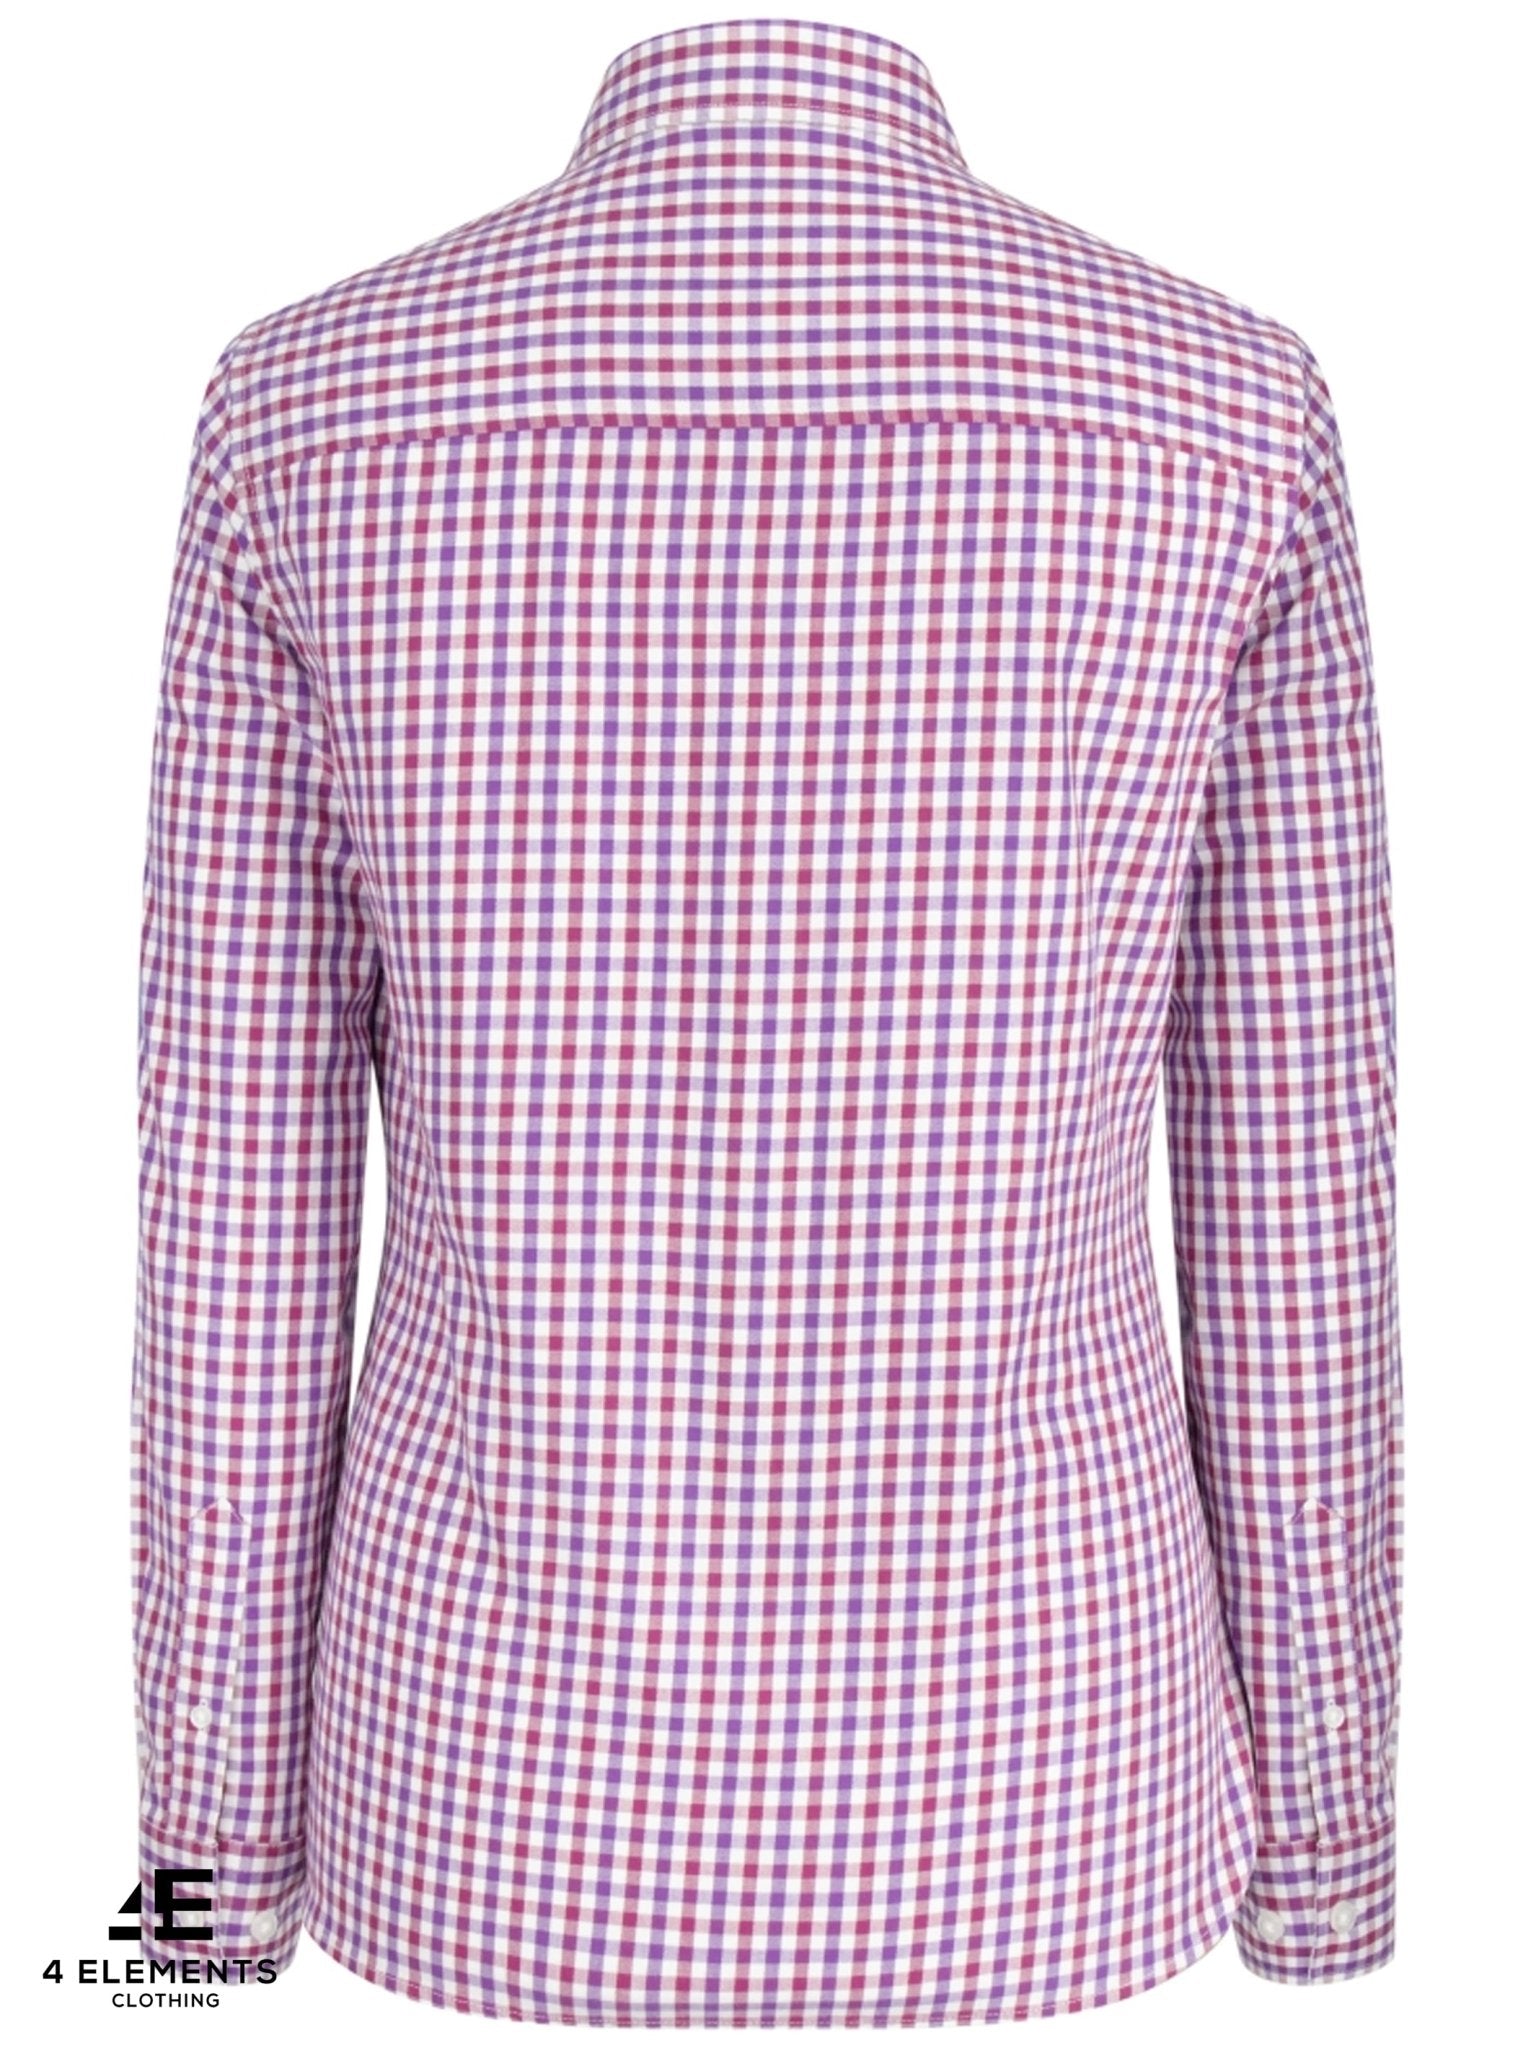 4elementsclothingHoggs of FifeHoggs of Fife - Ladies Long sleeve Shirt - Country check shirt with feminine trim - Becky IIShirtBECK/PB/08